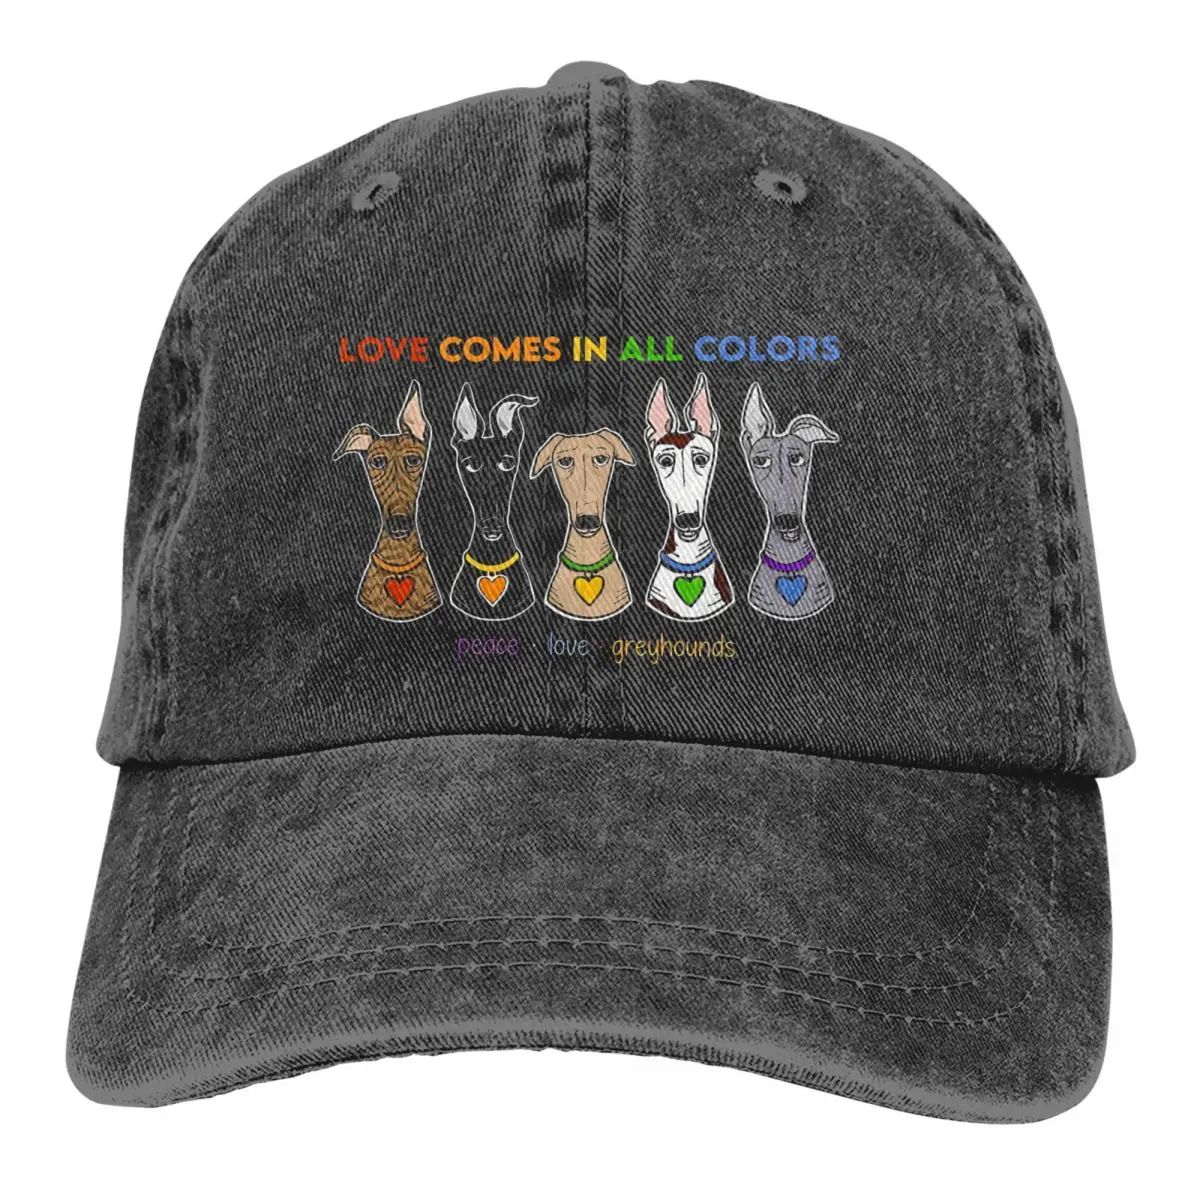 

Washed Men's Baseball Cap Peace Love Pride Graphic Trucker Snapback Caps Dad Hat Geryhound Greyhounds Dog Golf Hats